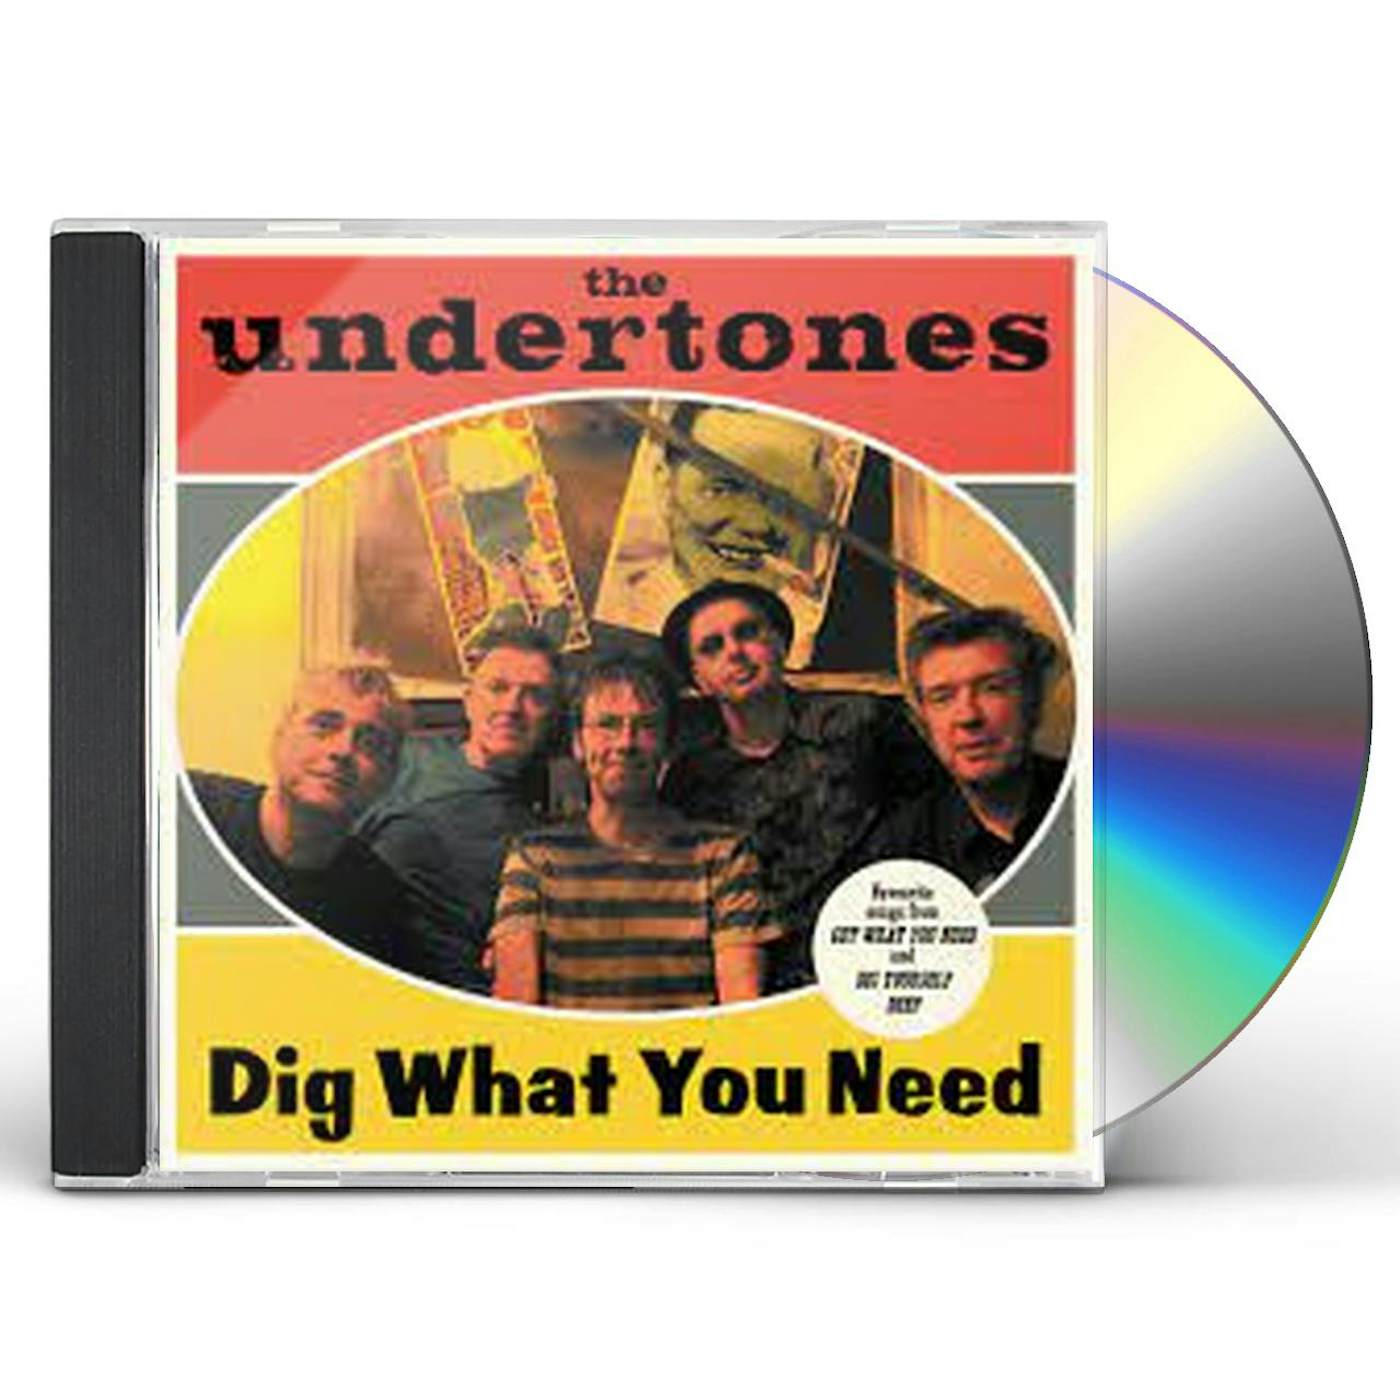 The Undertones DIG WHAT YOU NEED CD